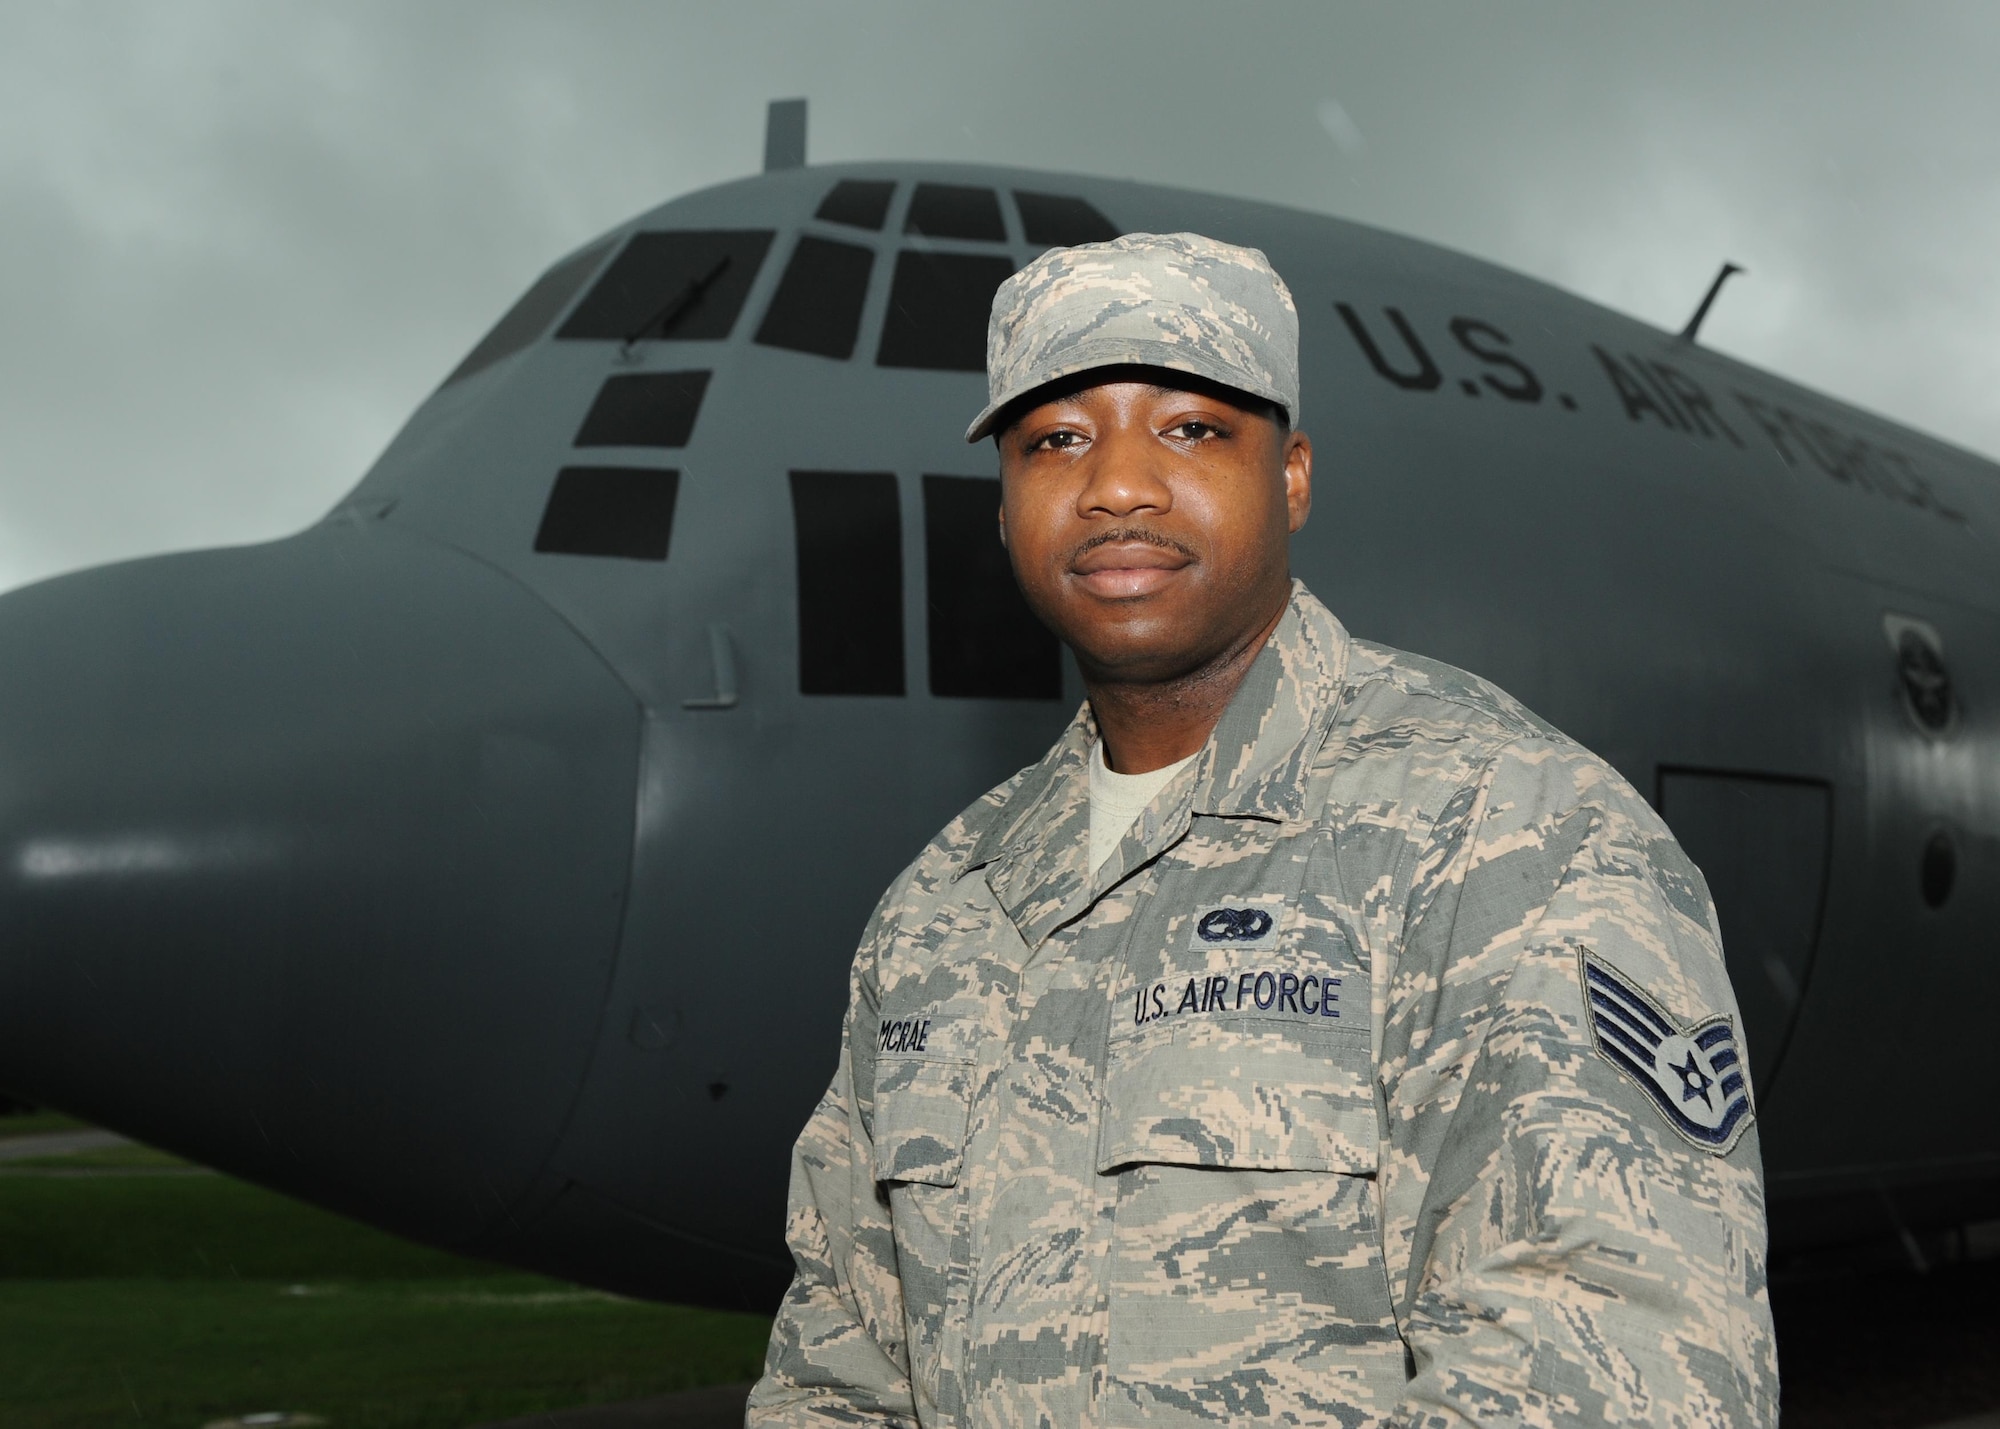 Staff Sgt. Darryl McRae, 19th Maintenance Squadron aircraft structural maintenance journeyman, is recognized as the Combat Airlifter of the Week June 6, 2017, at Little Rock Air Force Base, Ark. McRae was selected for leading a team to repair aircraft damaged in a hail storm. (U.S. Air photo by Airman 1st Class Grace Nichols)